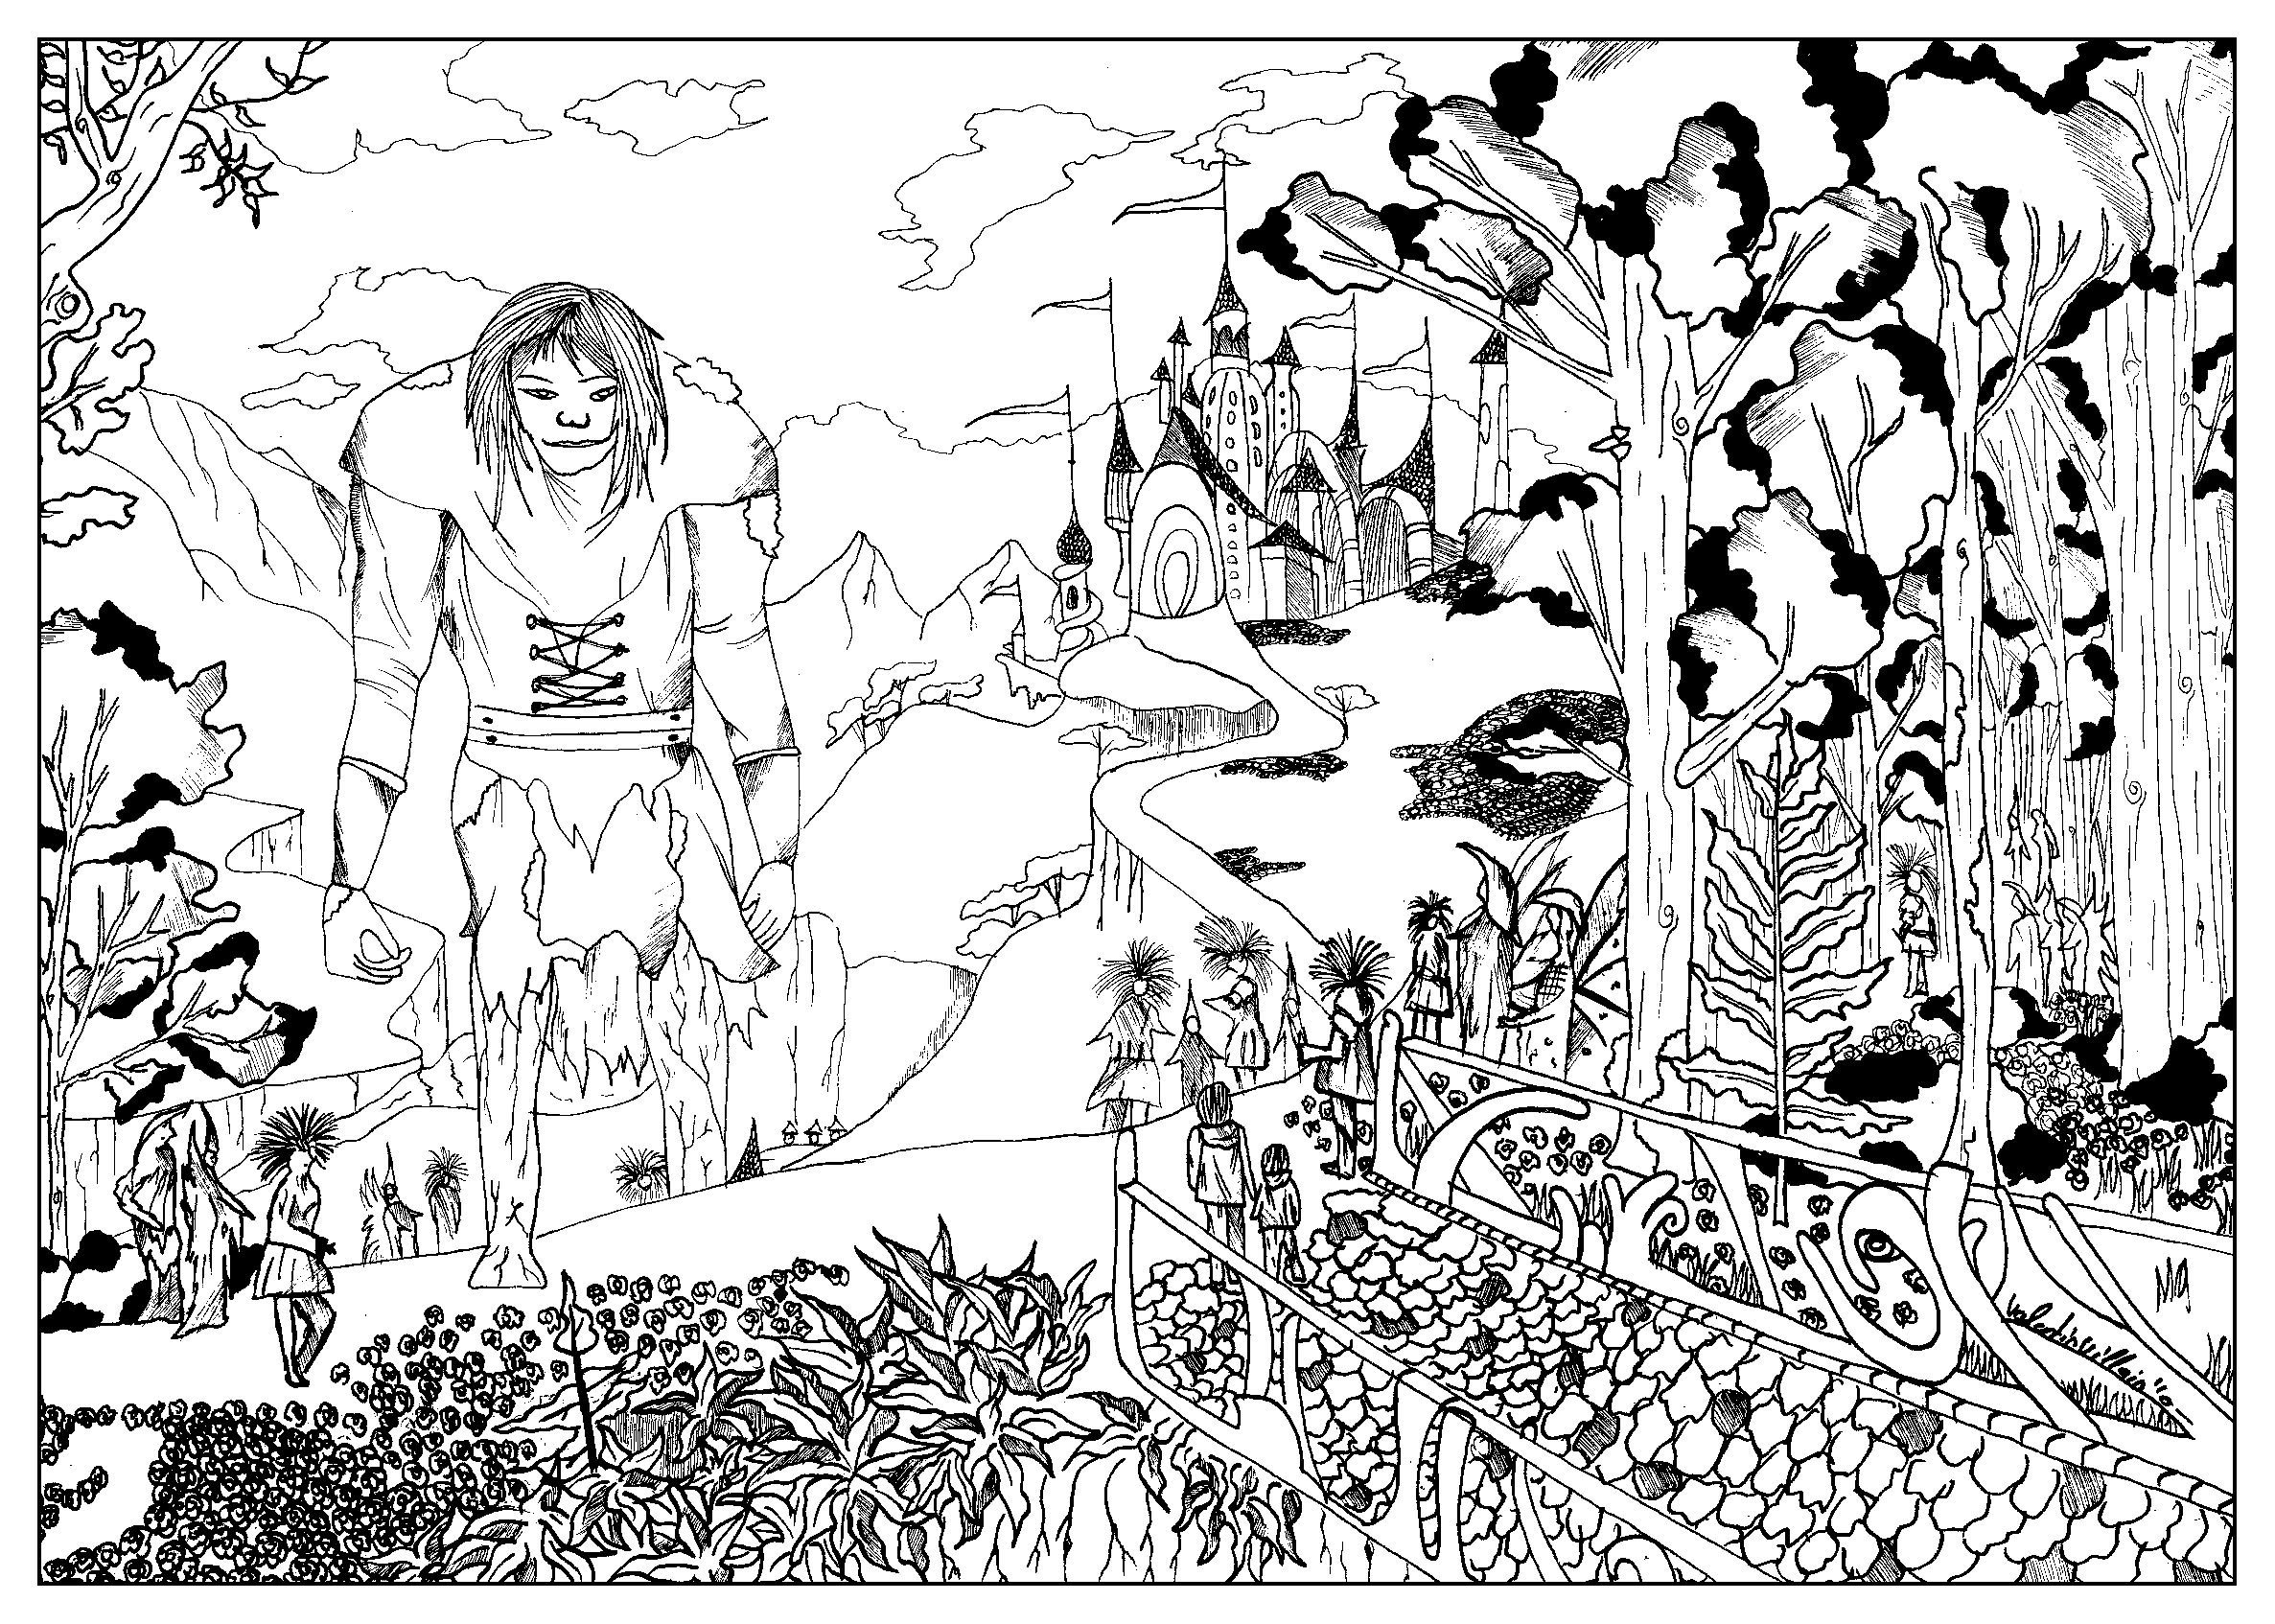 Coloring page inspired by the movie Bridge to Terabithia, with a giant, a castle and a mysterious forest, Artist : Valentin